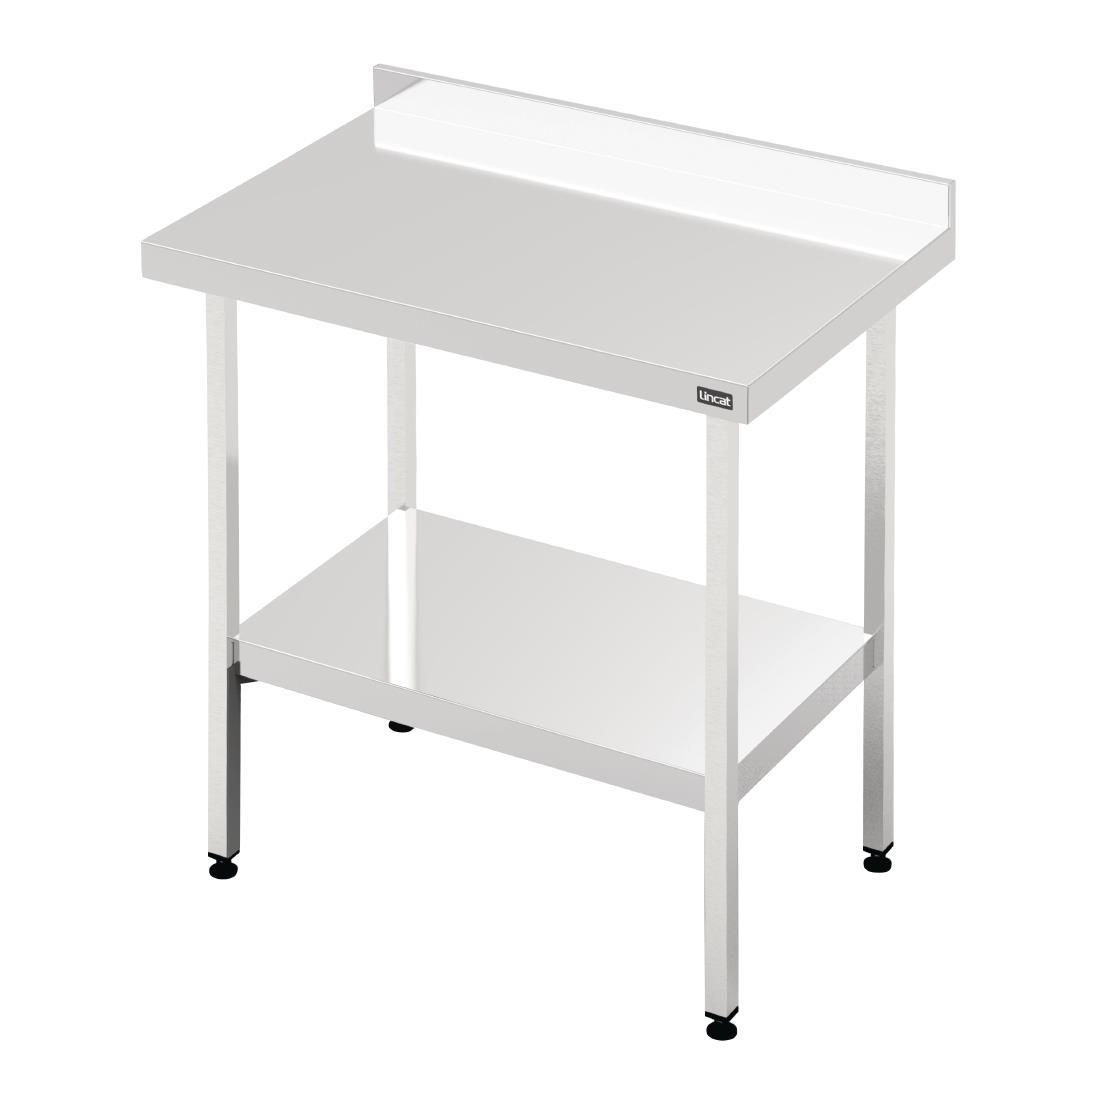 Lincat 600 Series Stainless Steel Wall Table with Undershelf 1500mm